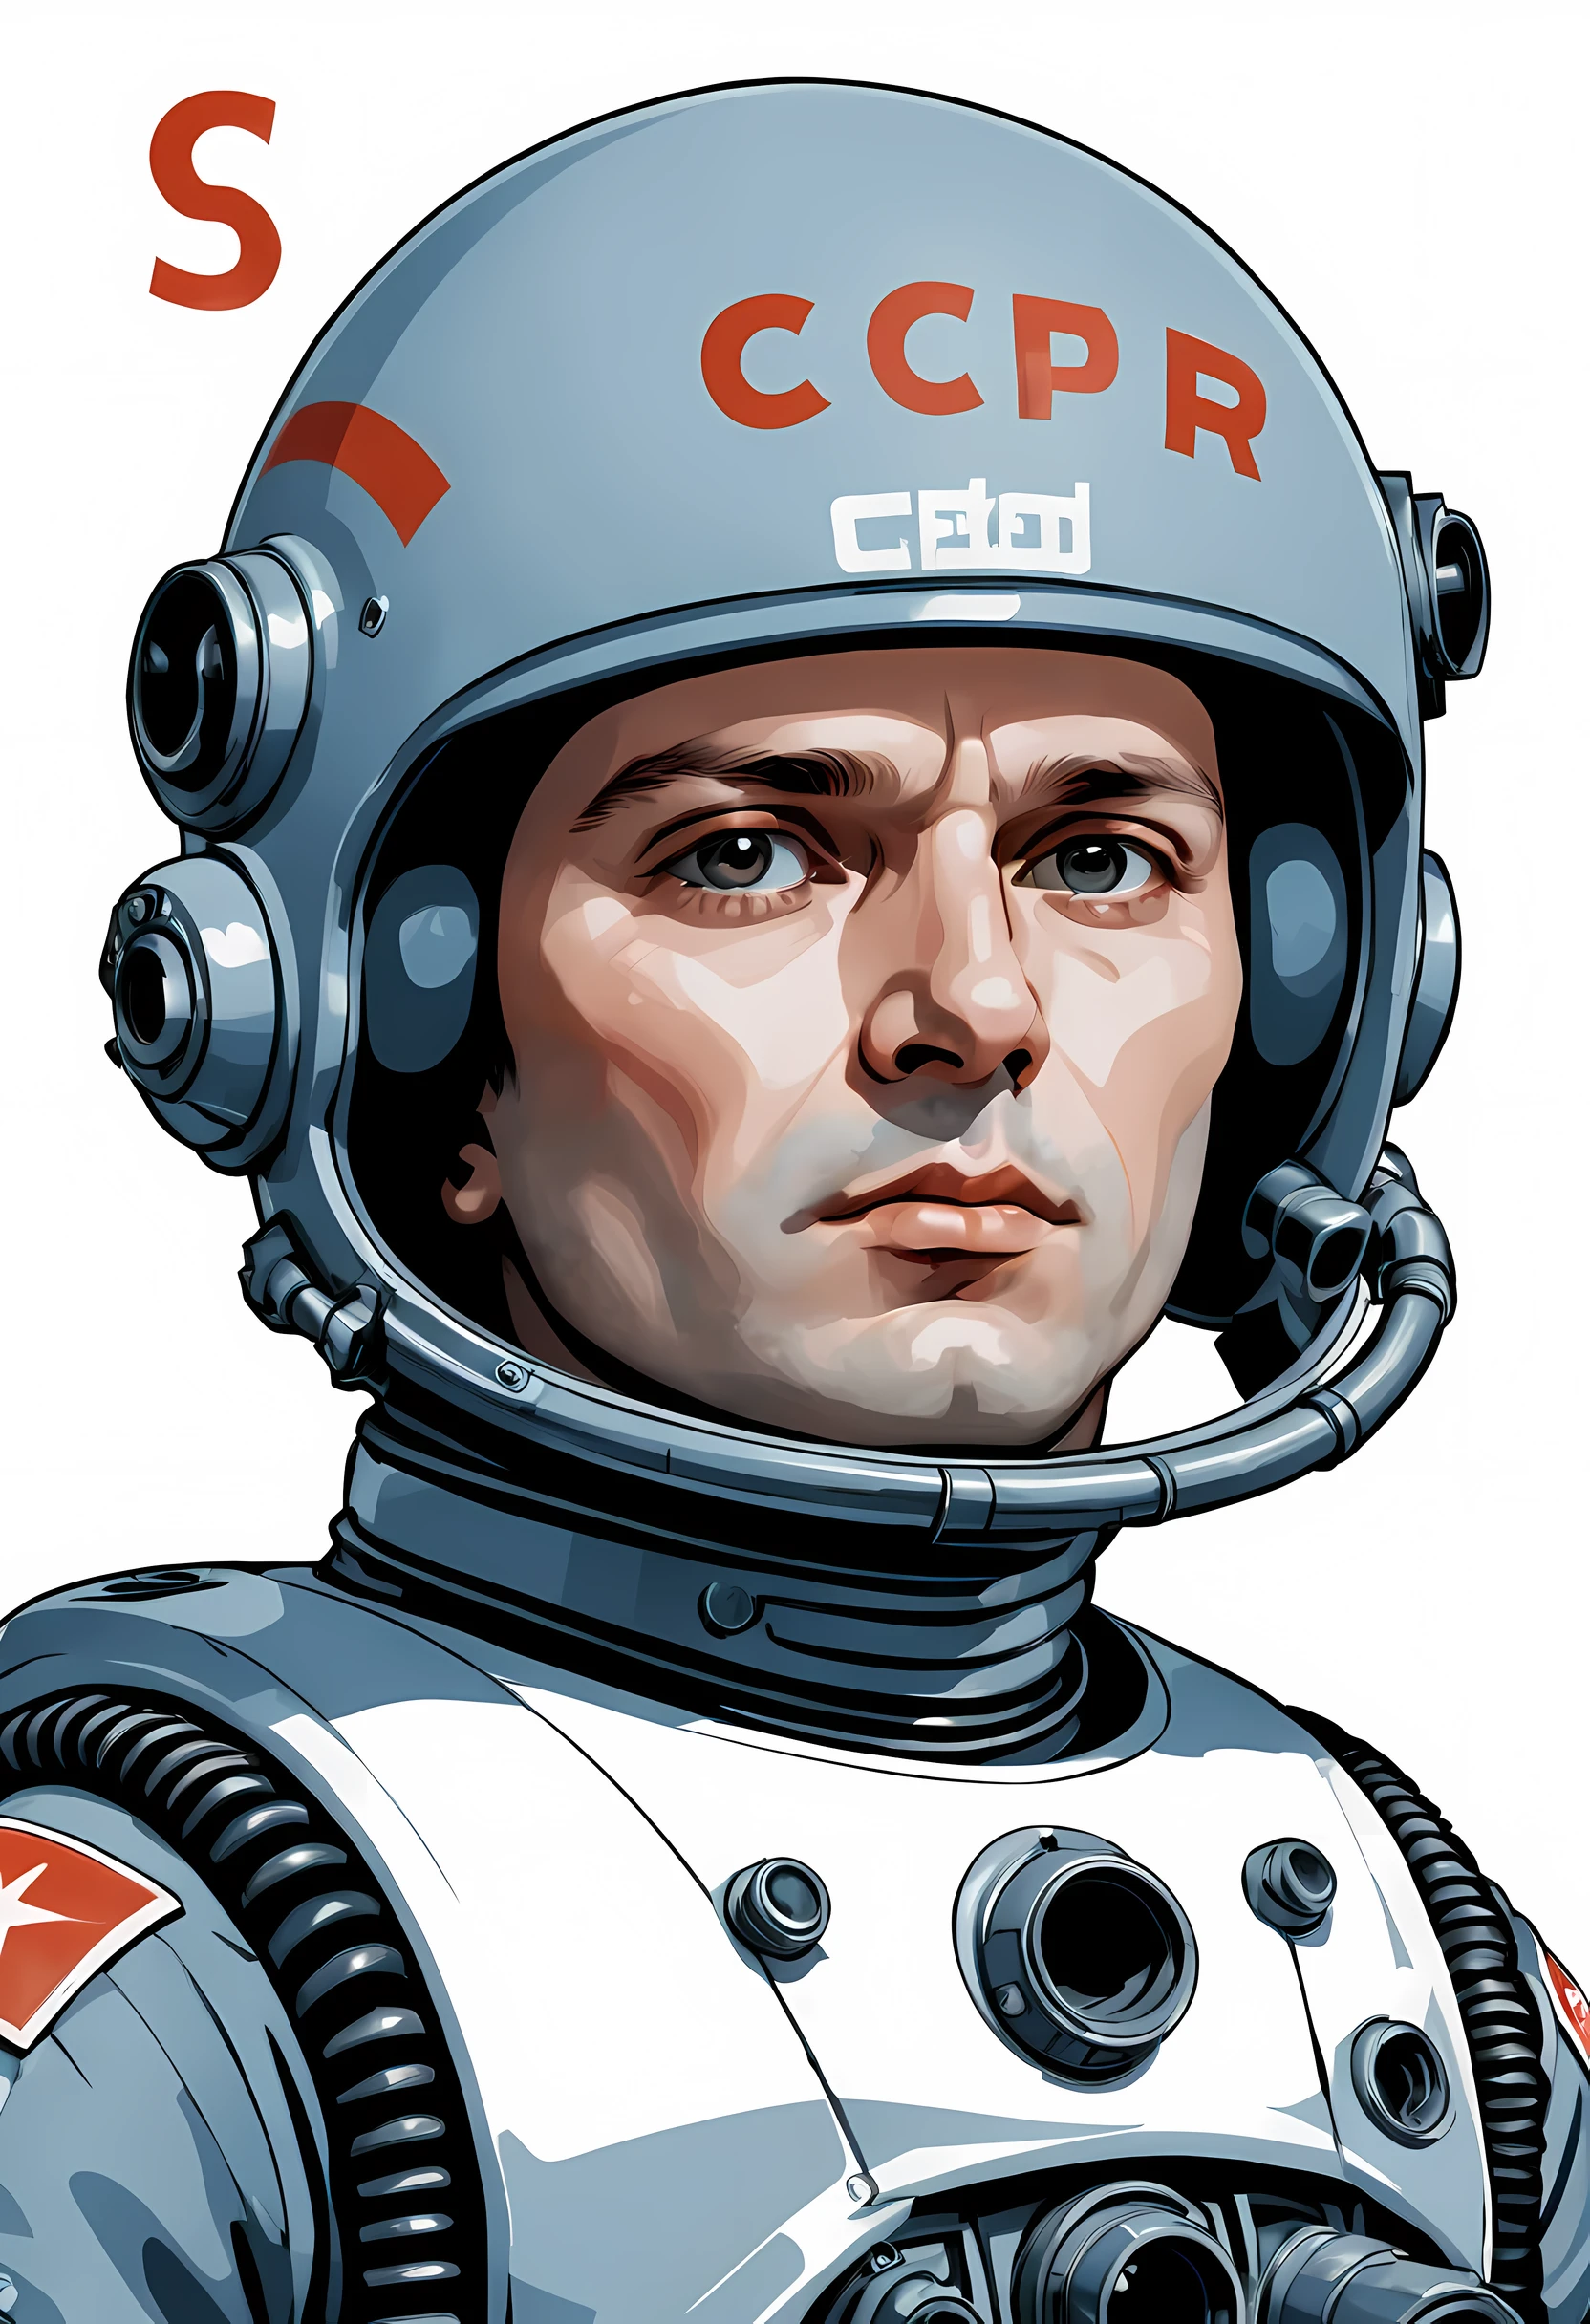 head portrait, космонавт ussr в шлеме Гигера, Letters "ussr" on the helmet, stern face of a 35-year-old man, look from under the eyebrows, hand with a fantastic blaster on his face, blaster barrel raised